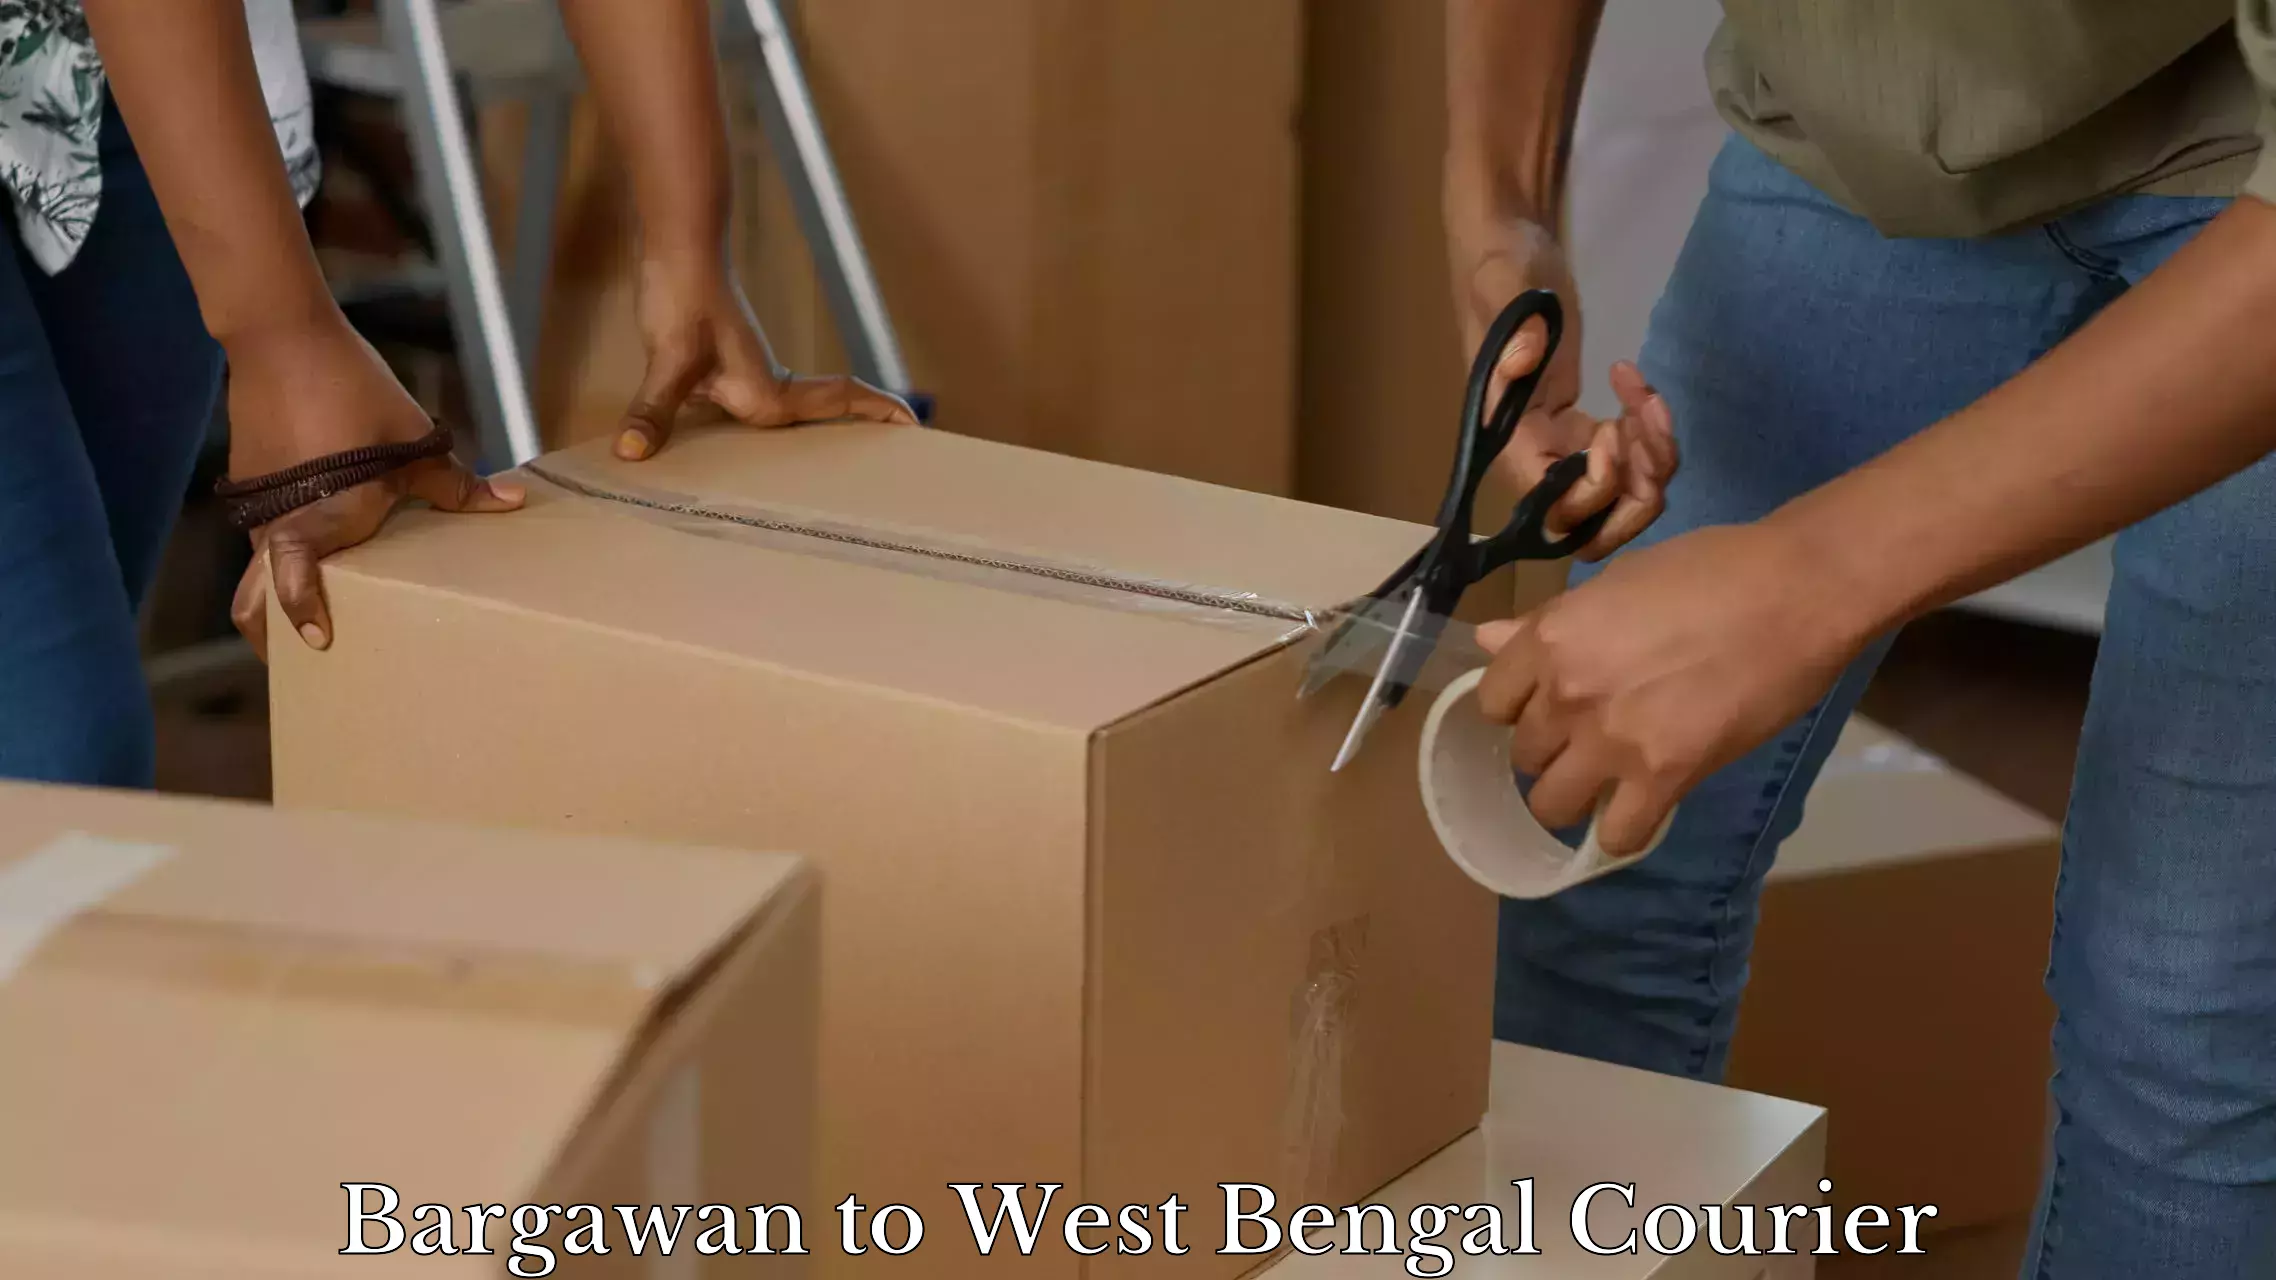 Baggage delivery estimate Bargawan to West Bengal